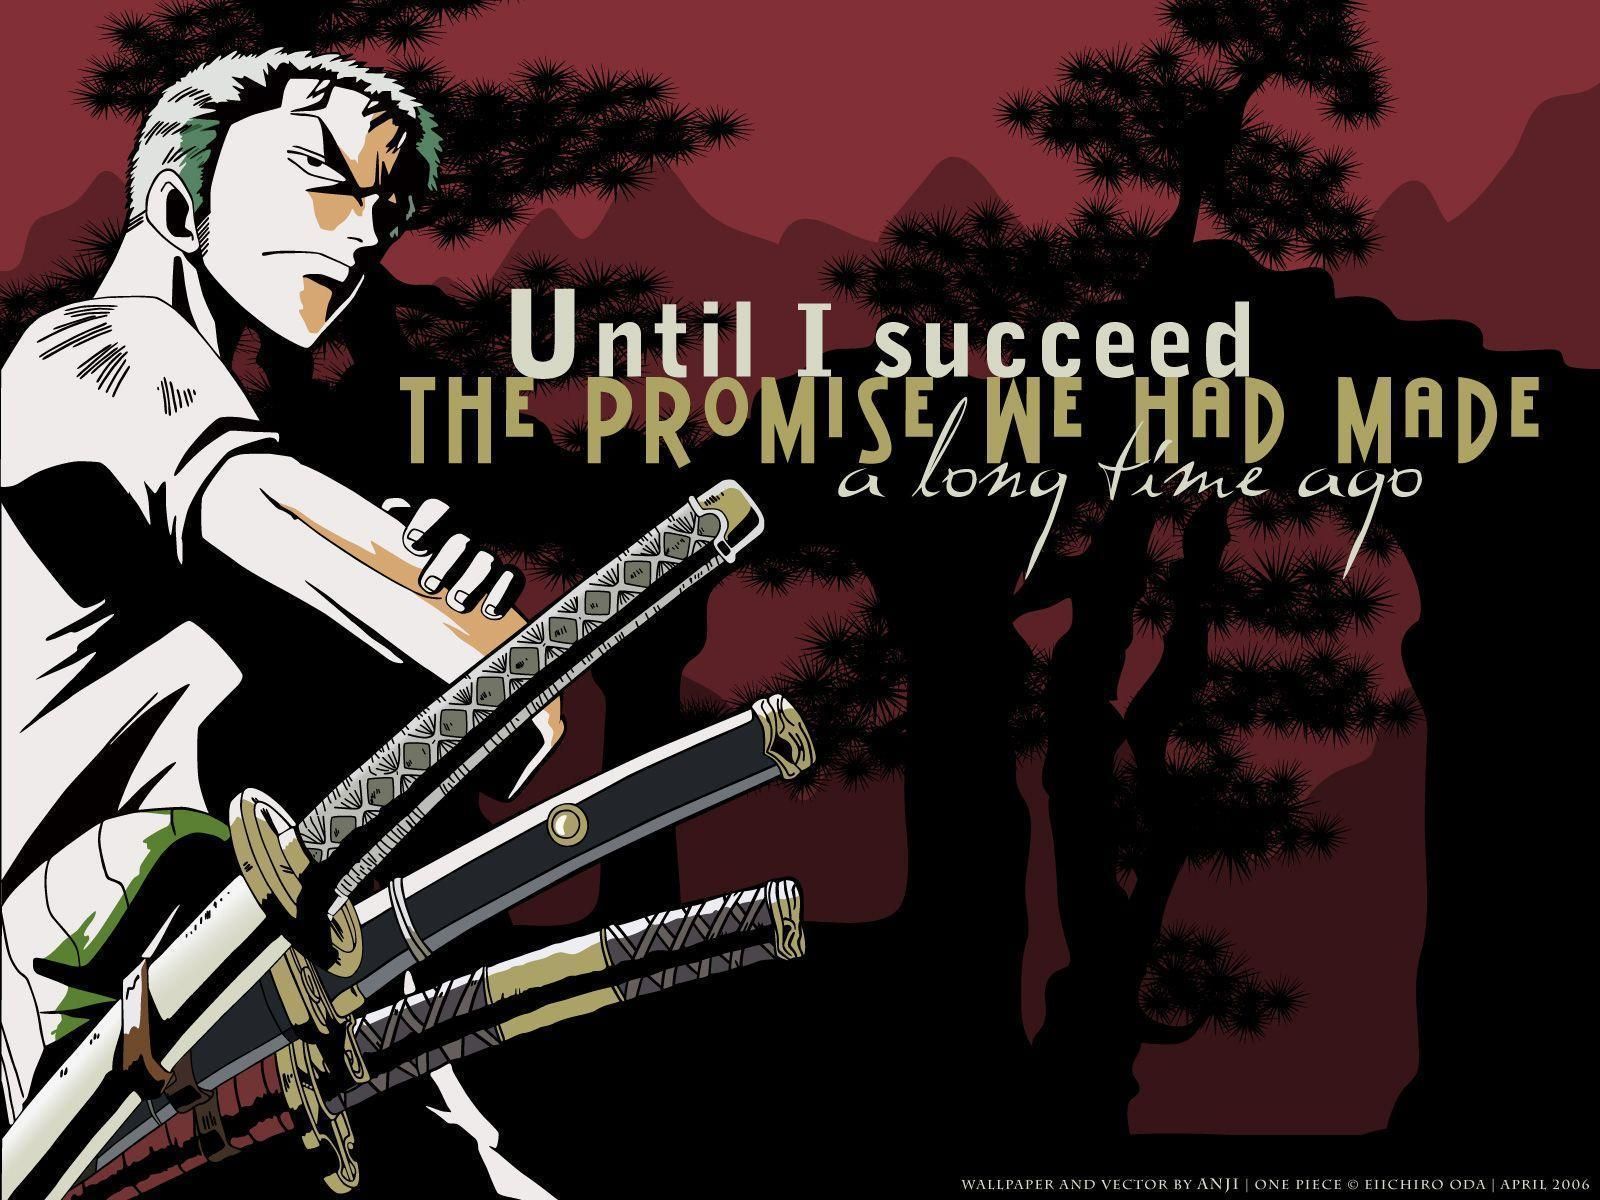 One Piece Roronoa Zoro Wallpaper Collection, Story, Quotes & Fan